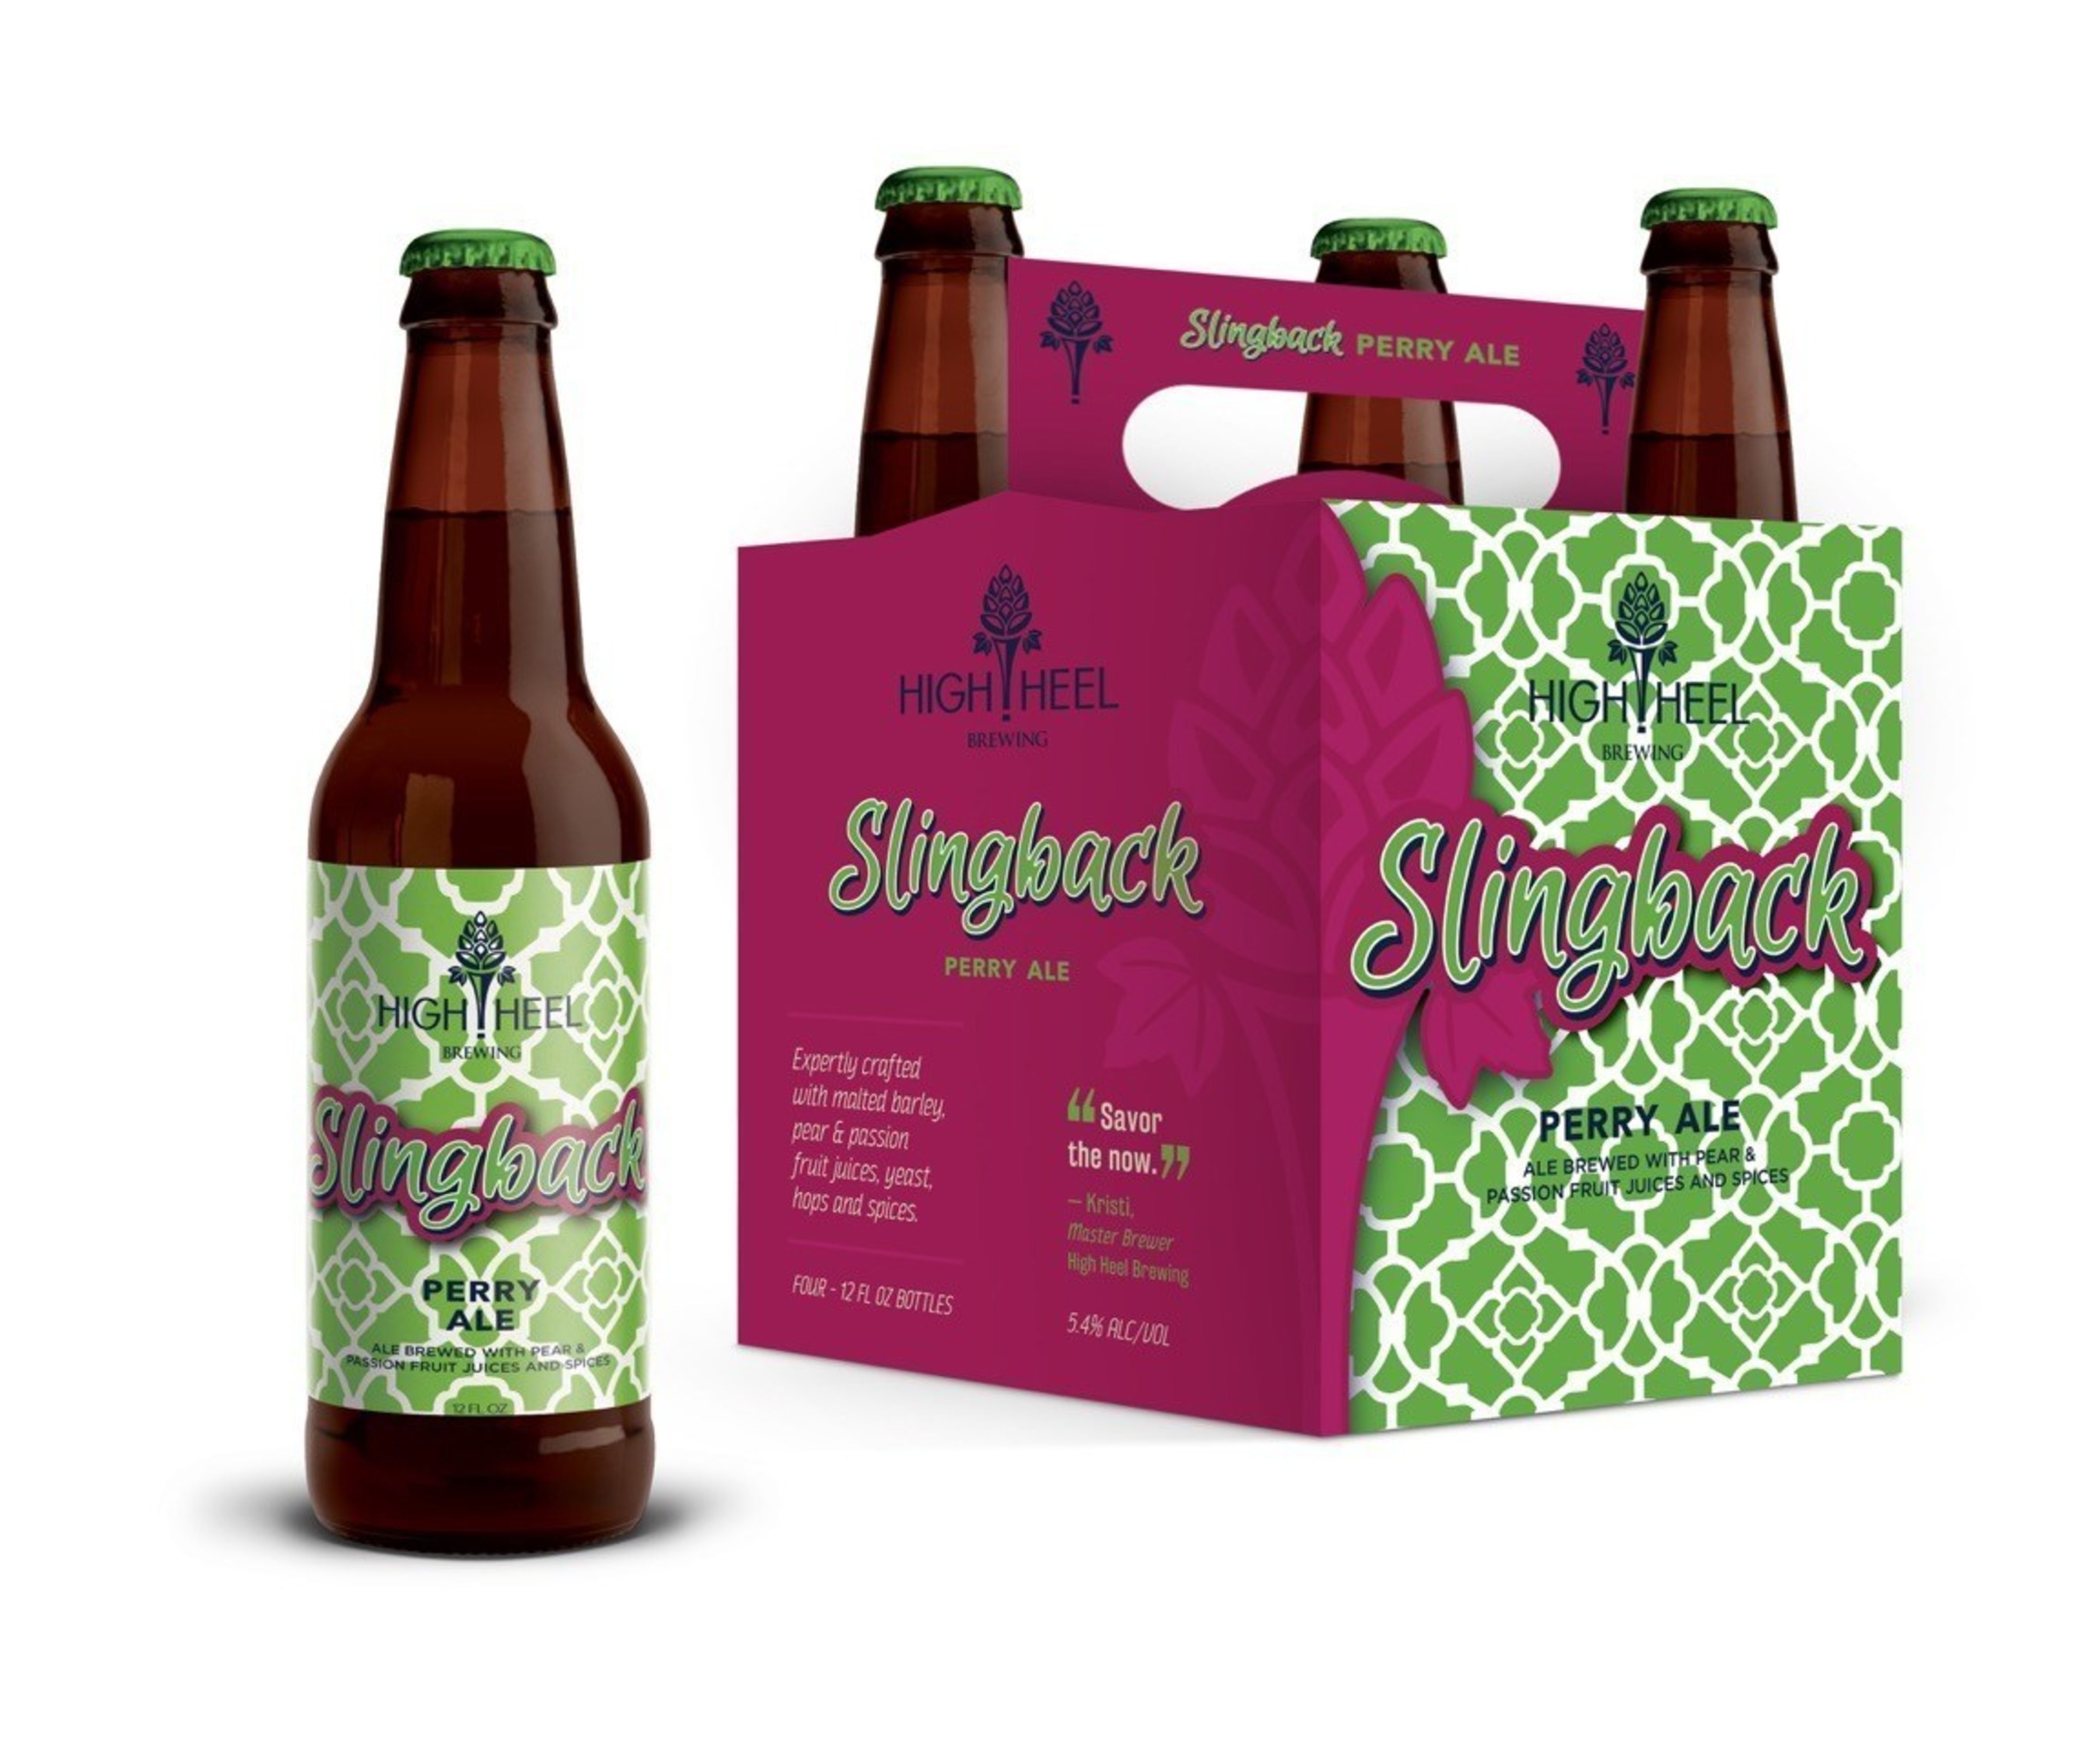 Slingback Perry Ale by High Heel Brewing. Photo Credit: High Heel Brewing.